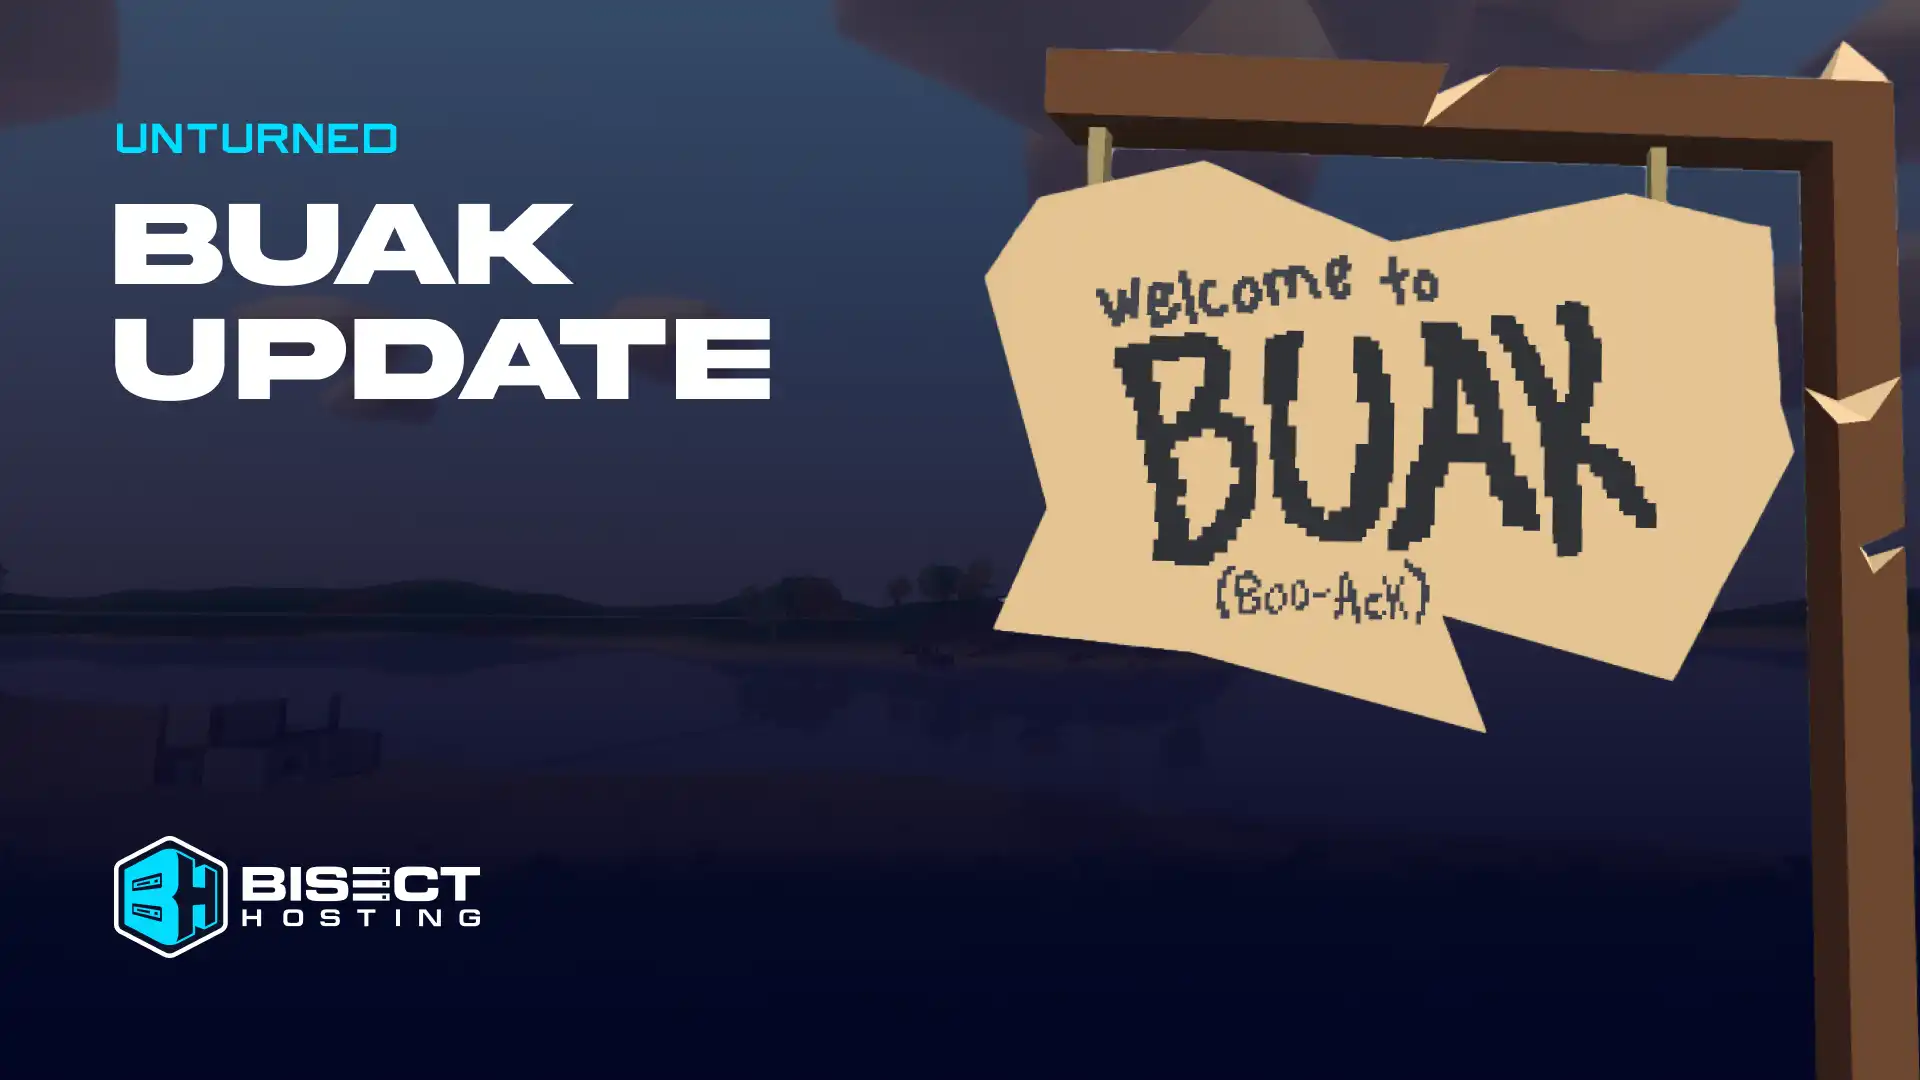 Unturned Buak Update: What to Expect from Patch 3.23.10.0